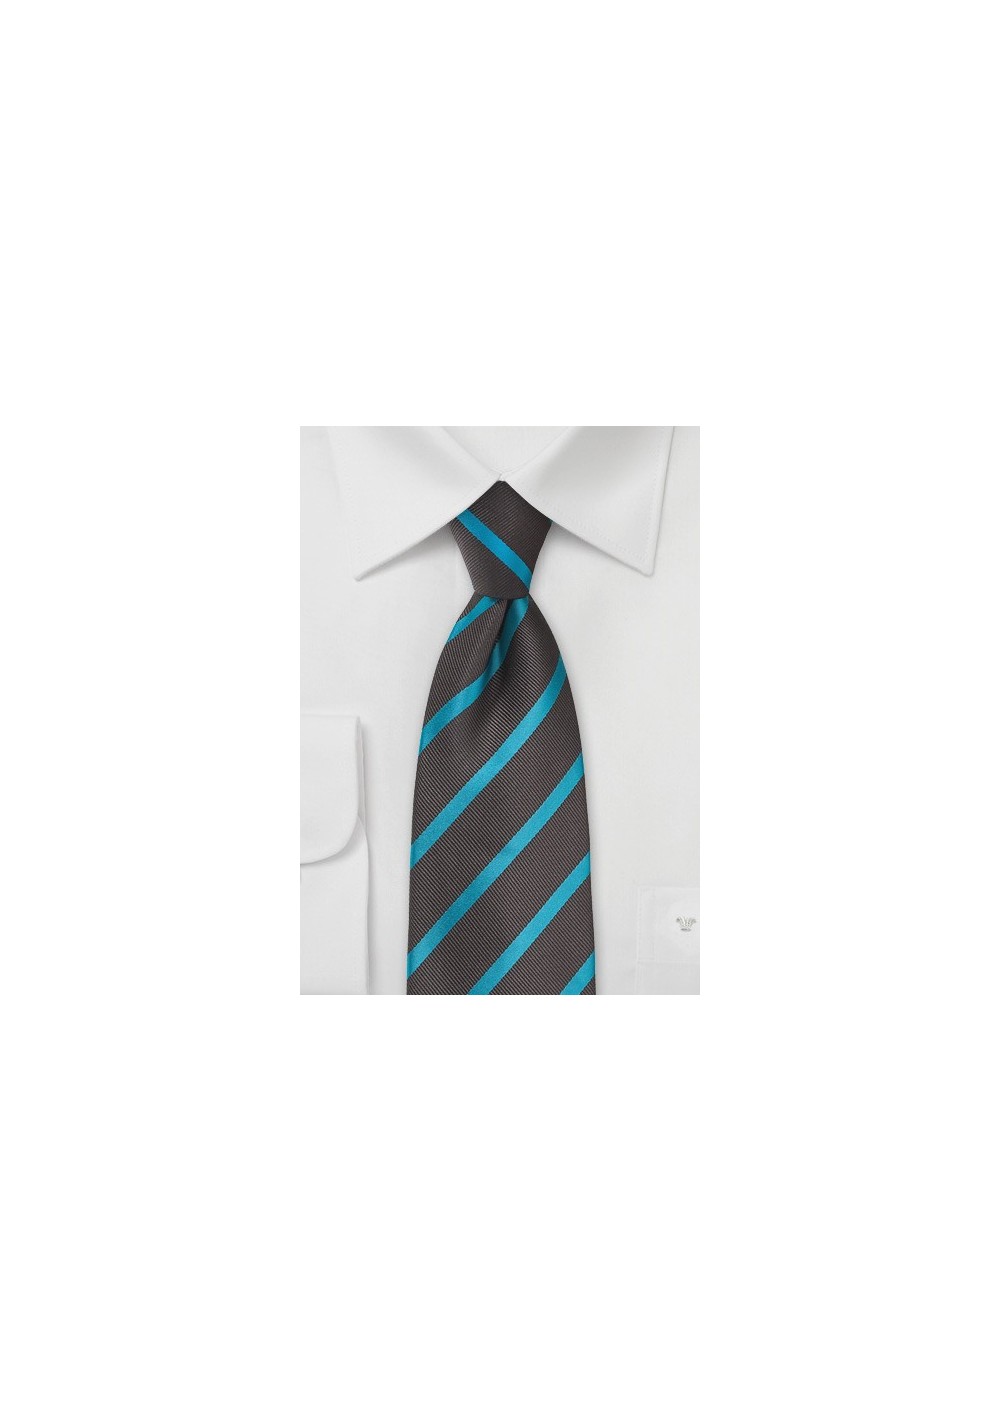 Espresso and Teal Striped Tie